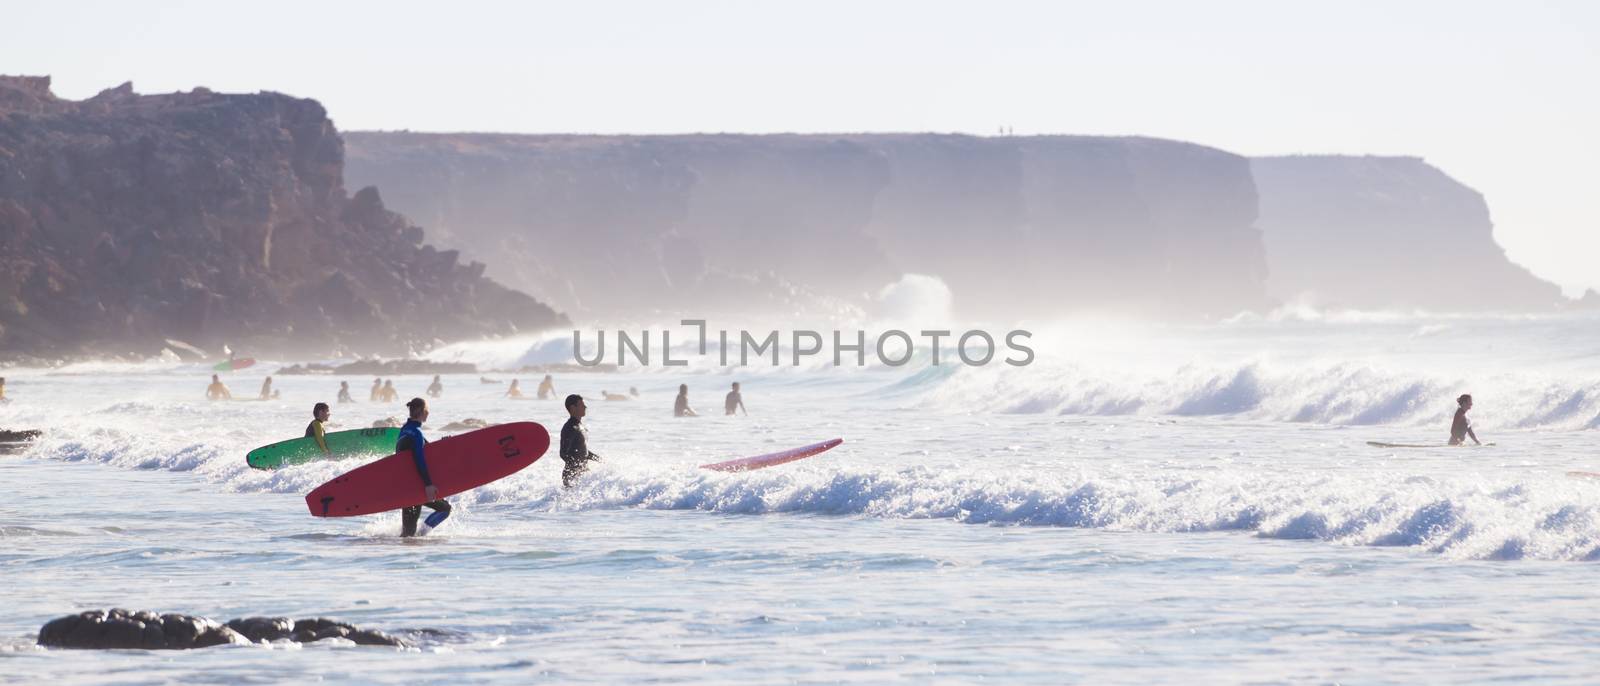 EL Cotillo, Spain - Dec 17, 2015:  Active sporty people having fun learning to surf on El Cotillo beach, famous surfing destination on Fuerteventura, Canary Islands, Spain on December 17, 2015. 